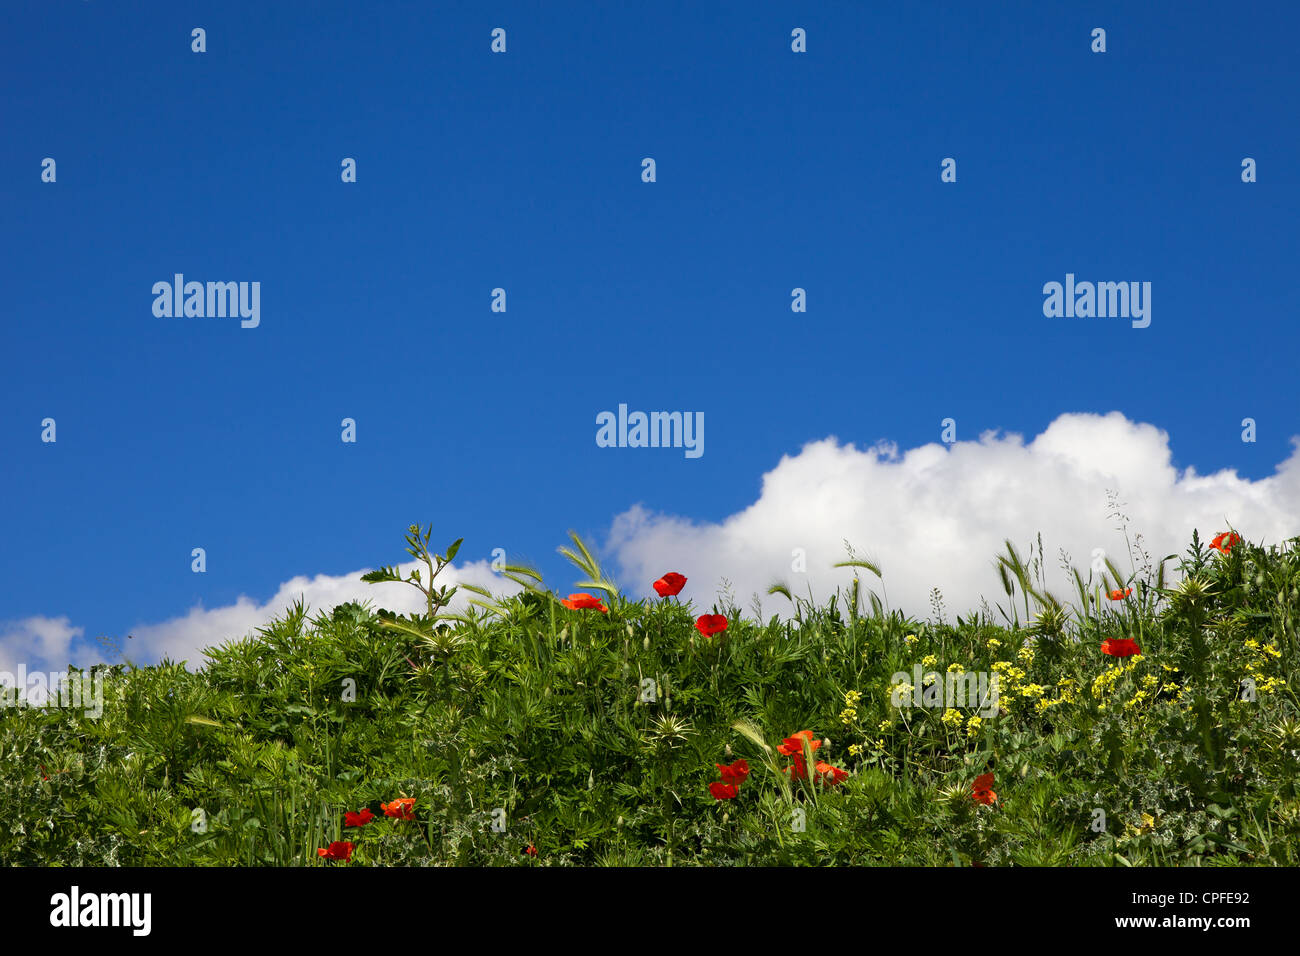 Tuscany landscape with poppies Stock Photo